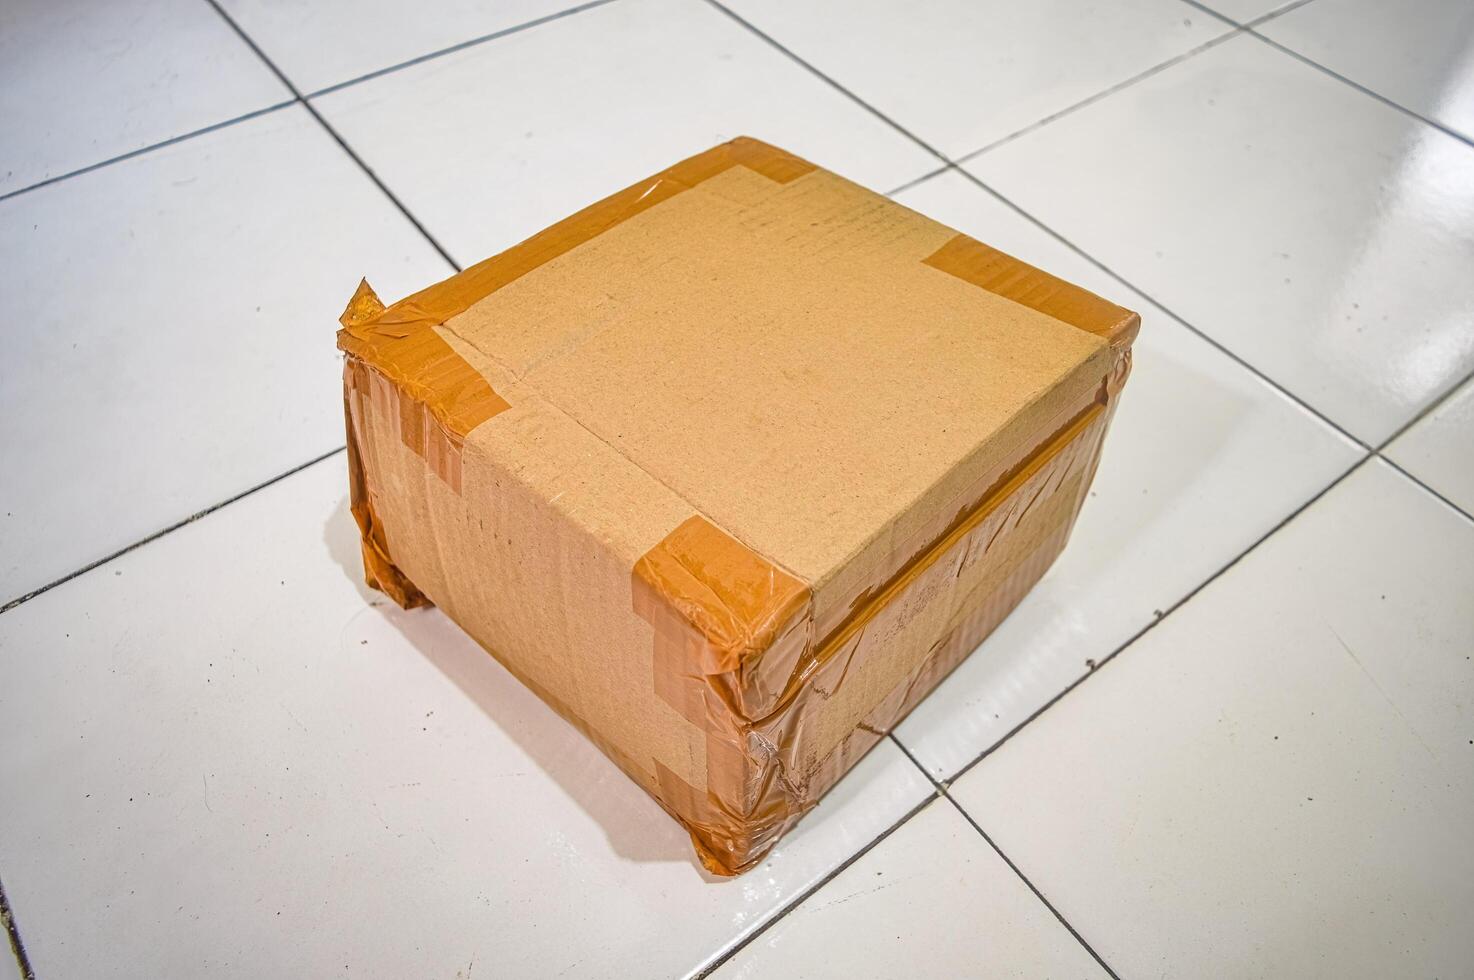 Cardboard boxes insulated with tape for sending packages lay on the floor photo